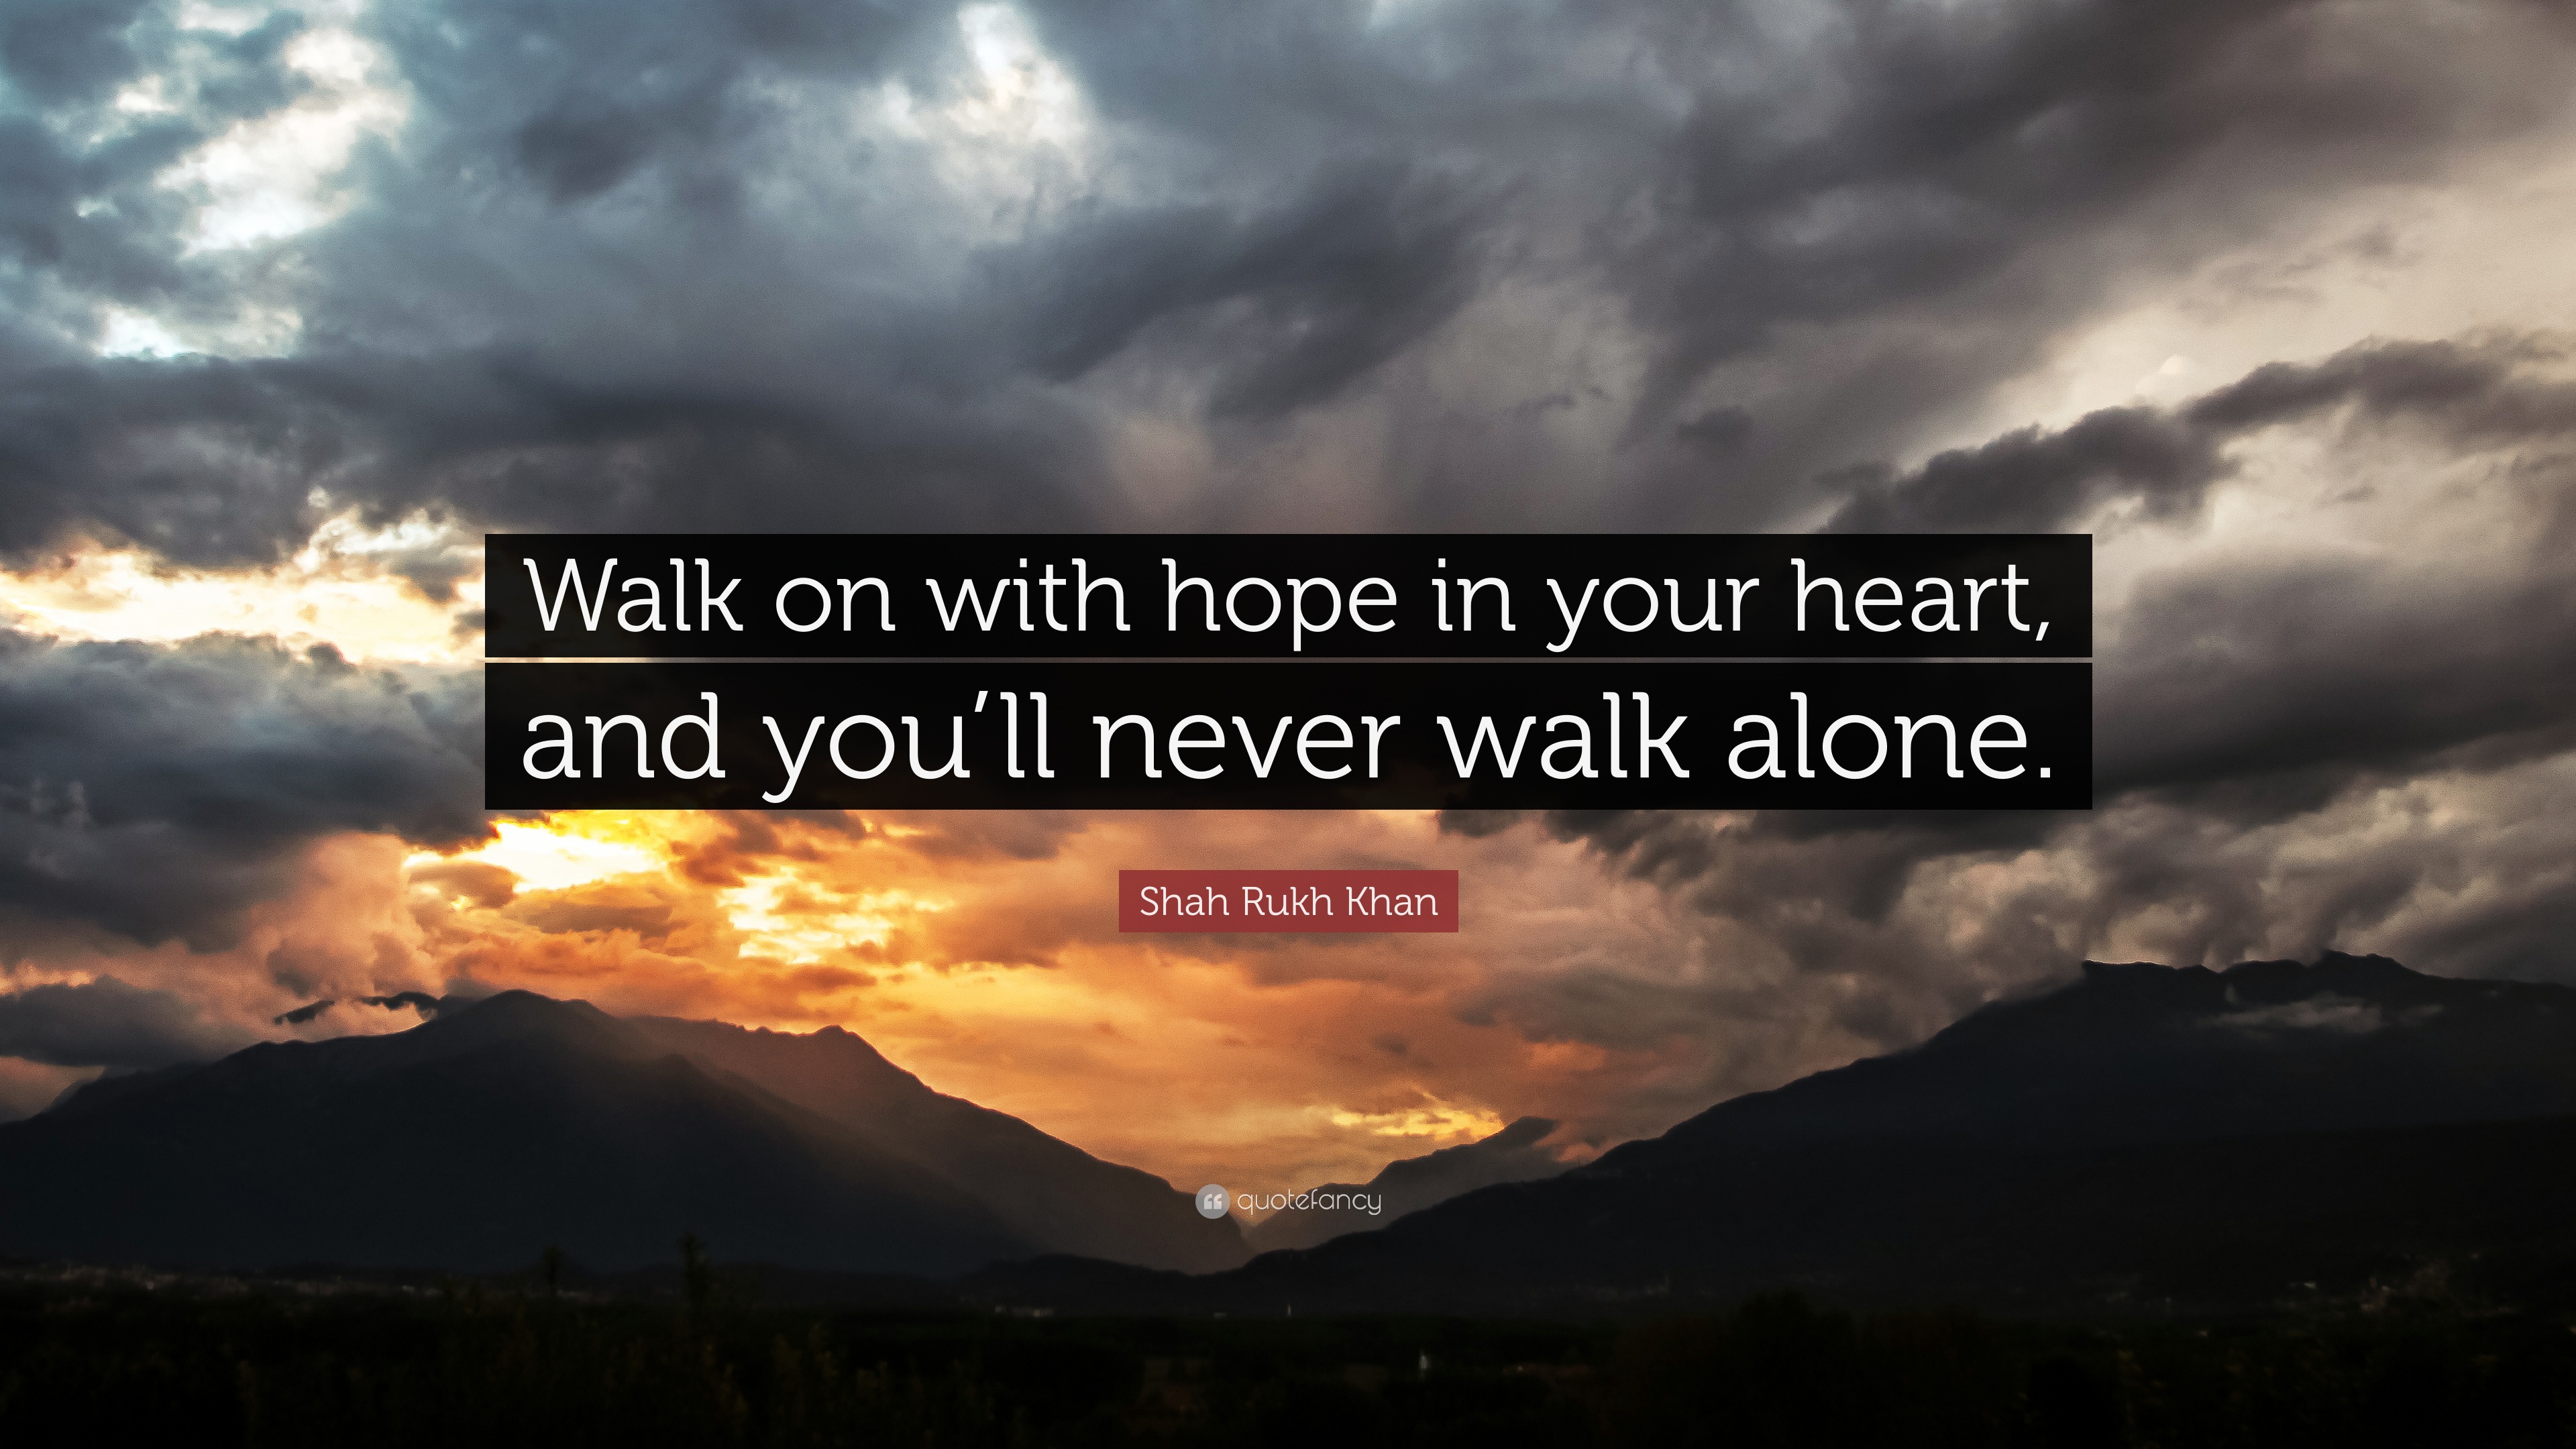 Shah Rukh Khan Quote: “Walk on with hope in your heart, and you’ll ...